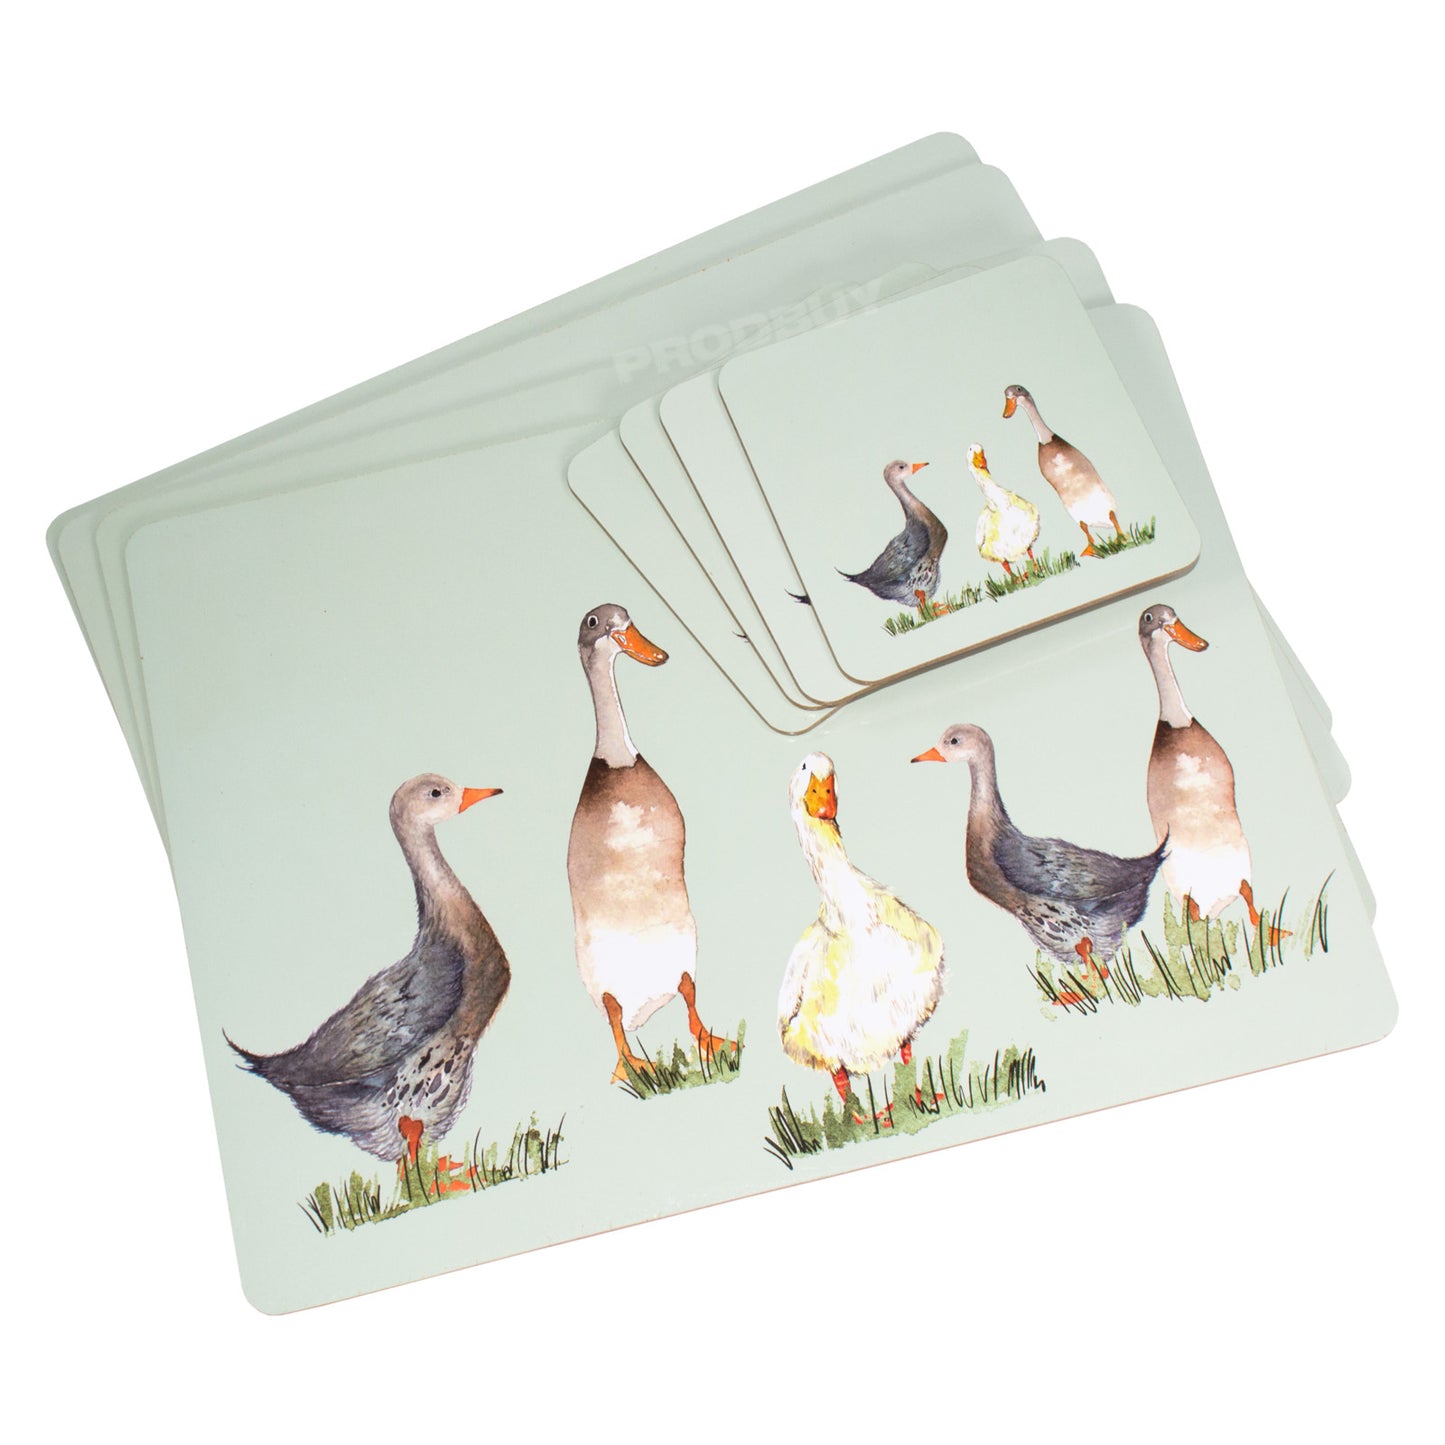 Set of 4 Placemats and Drinks Coasters Farmyard Ducks Pattern Dining Table Place Settings